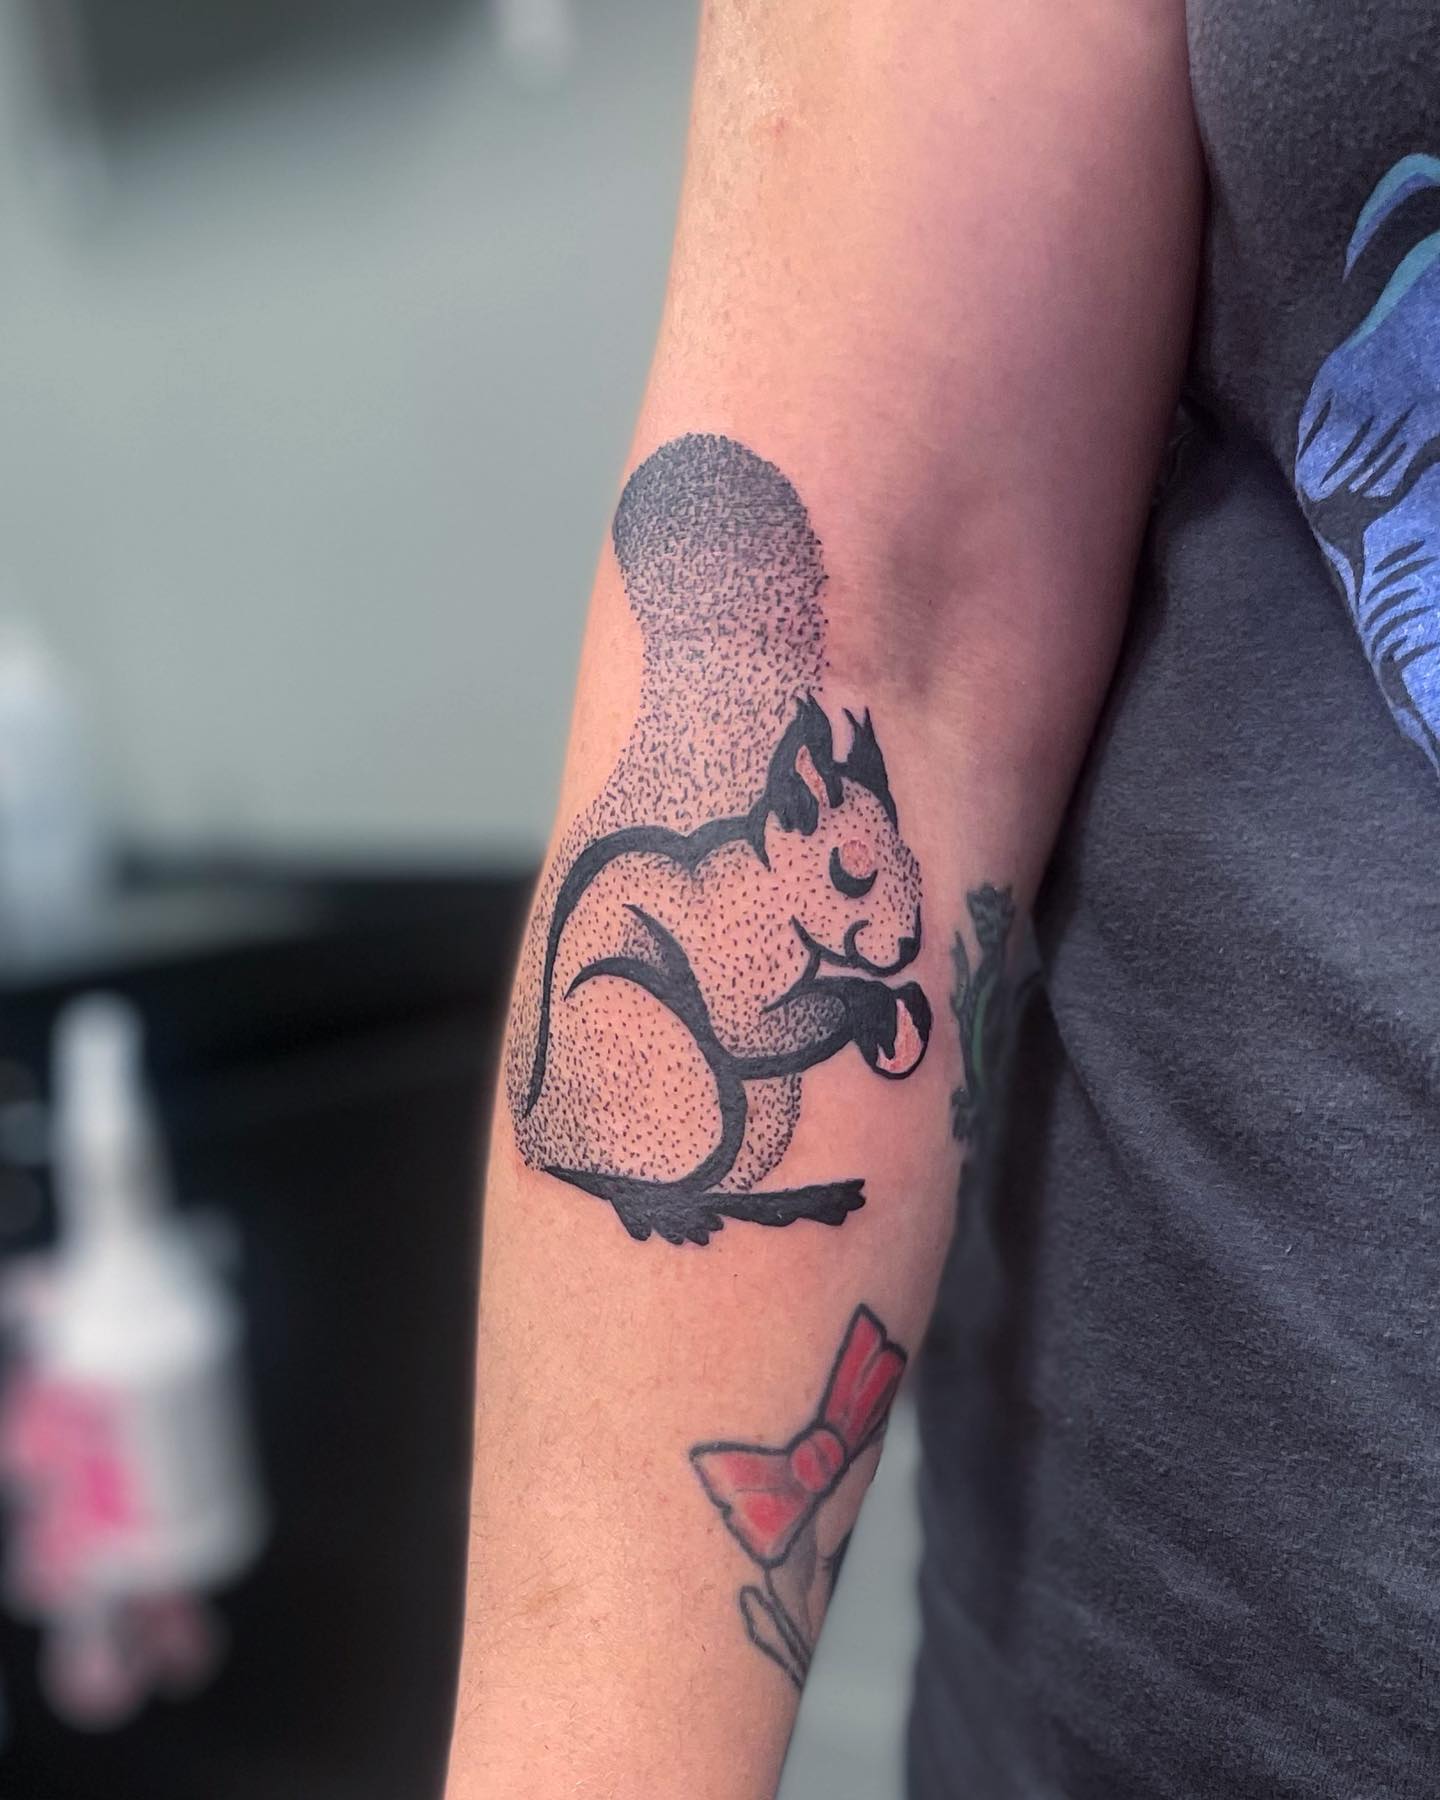  Squirrels can be one of the cutest animals in the world. If you want to go for a minimalist tattoo, give it a shot.